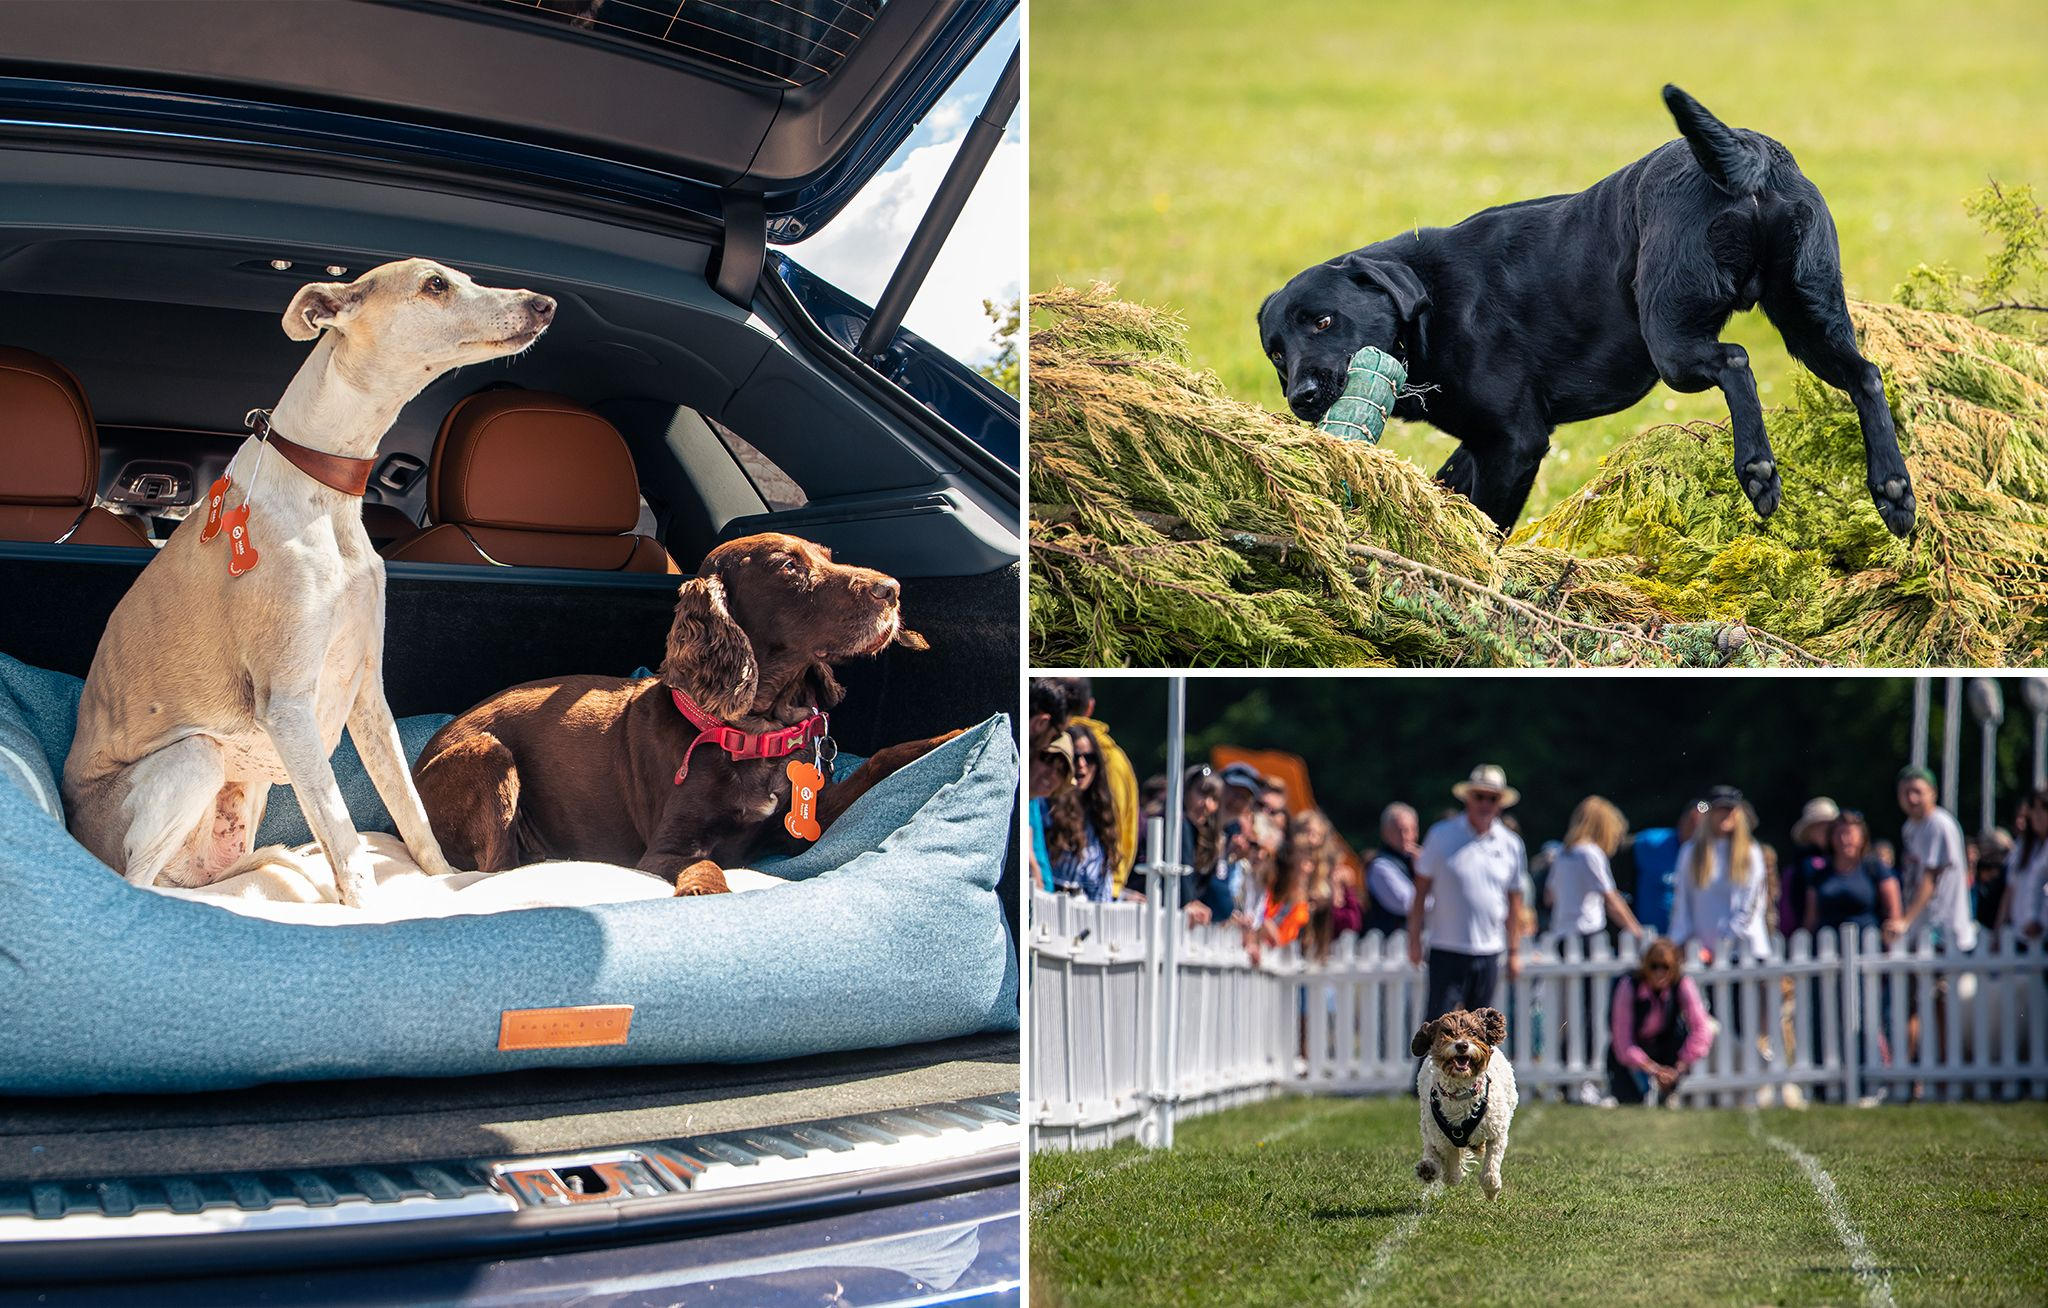 Bentley raises the Woof - at Goodwood’s festival for dogs